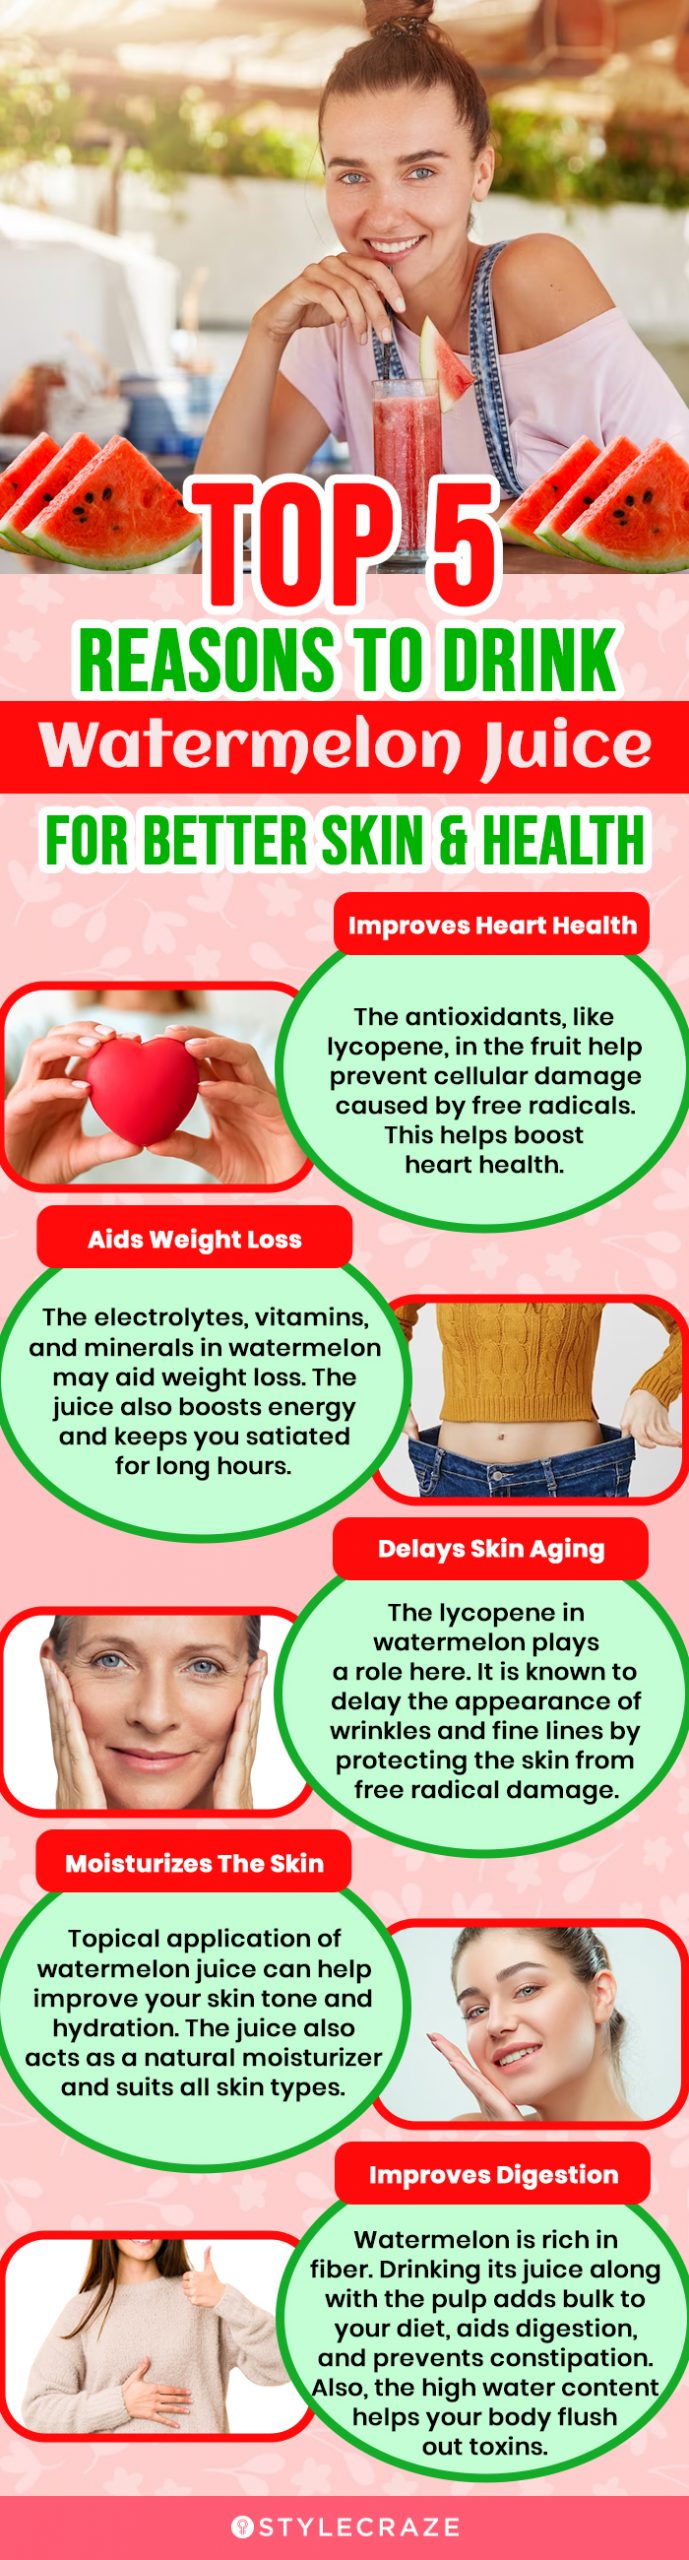 top 5 reasons to drink watermelon juice for better skin & health (infographic)